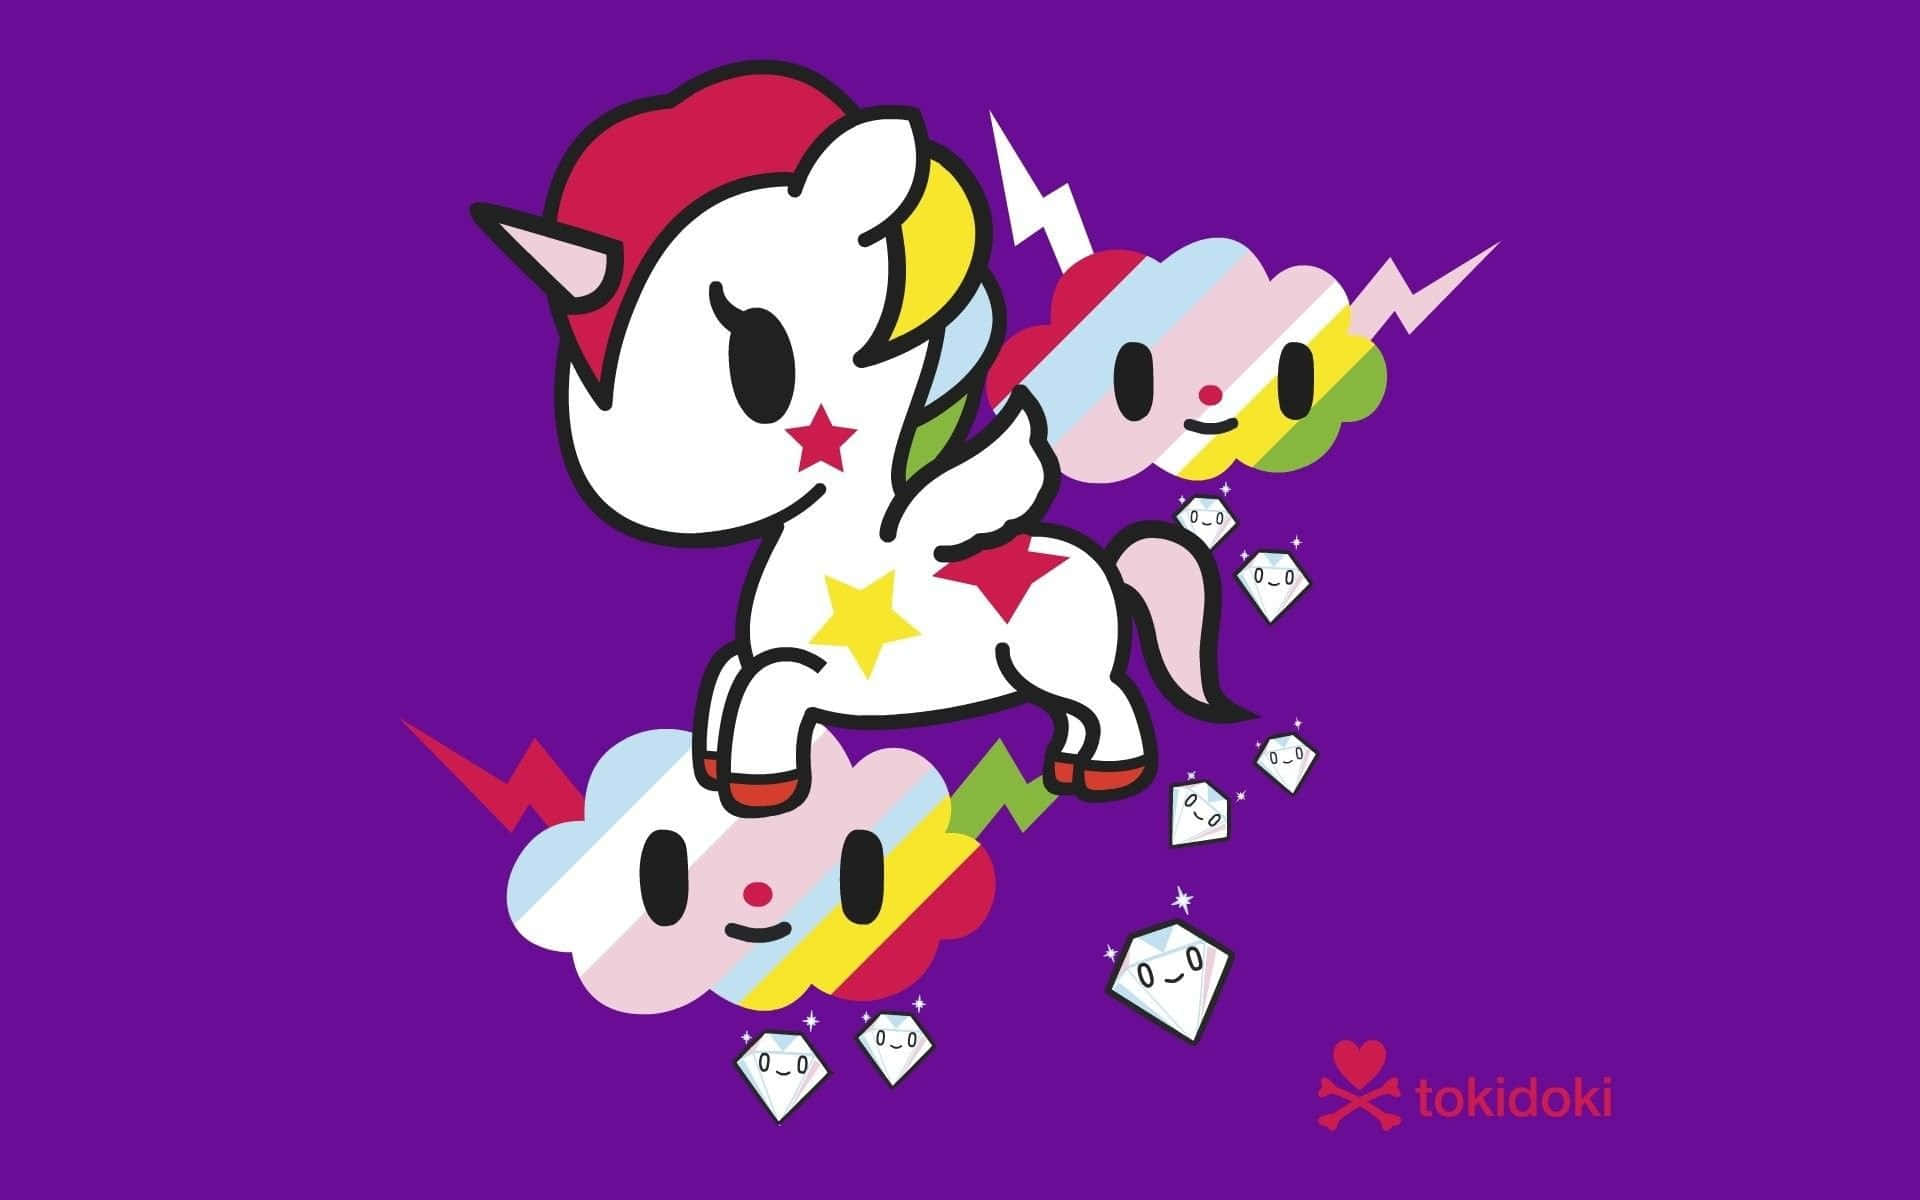 HD wallpaper Tokidoki Test cow and goat illustration Cartoons Others  Funny  Wallpaper Flare